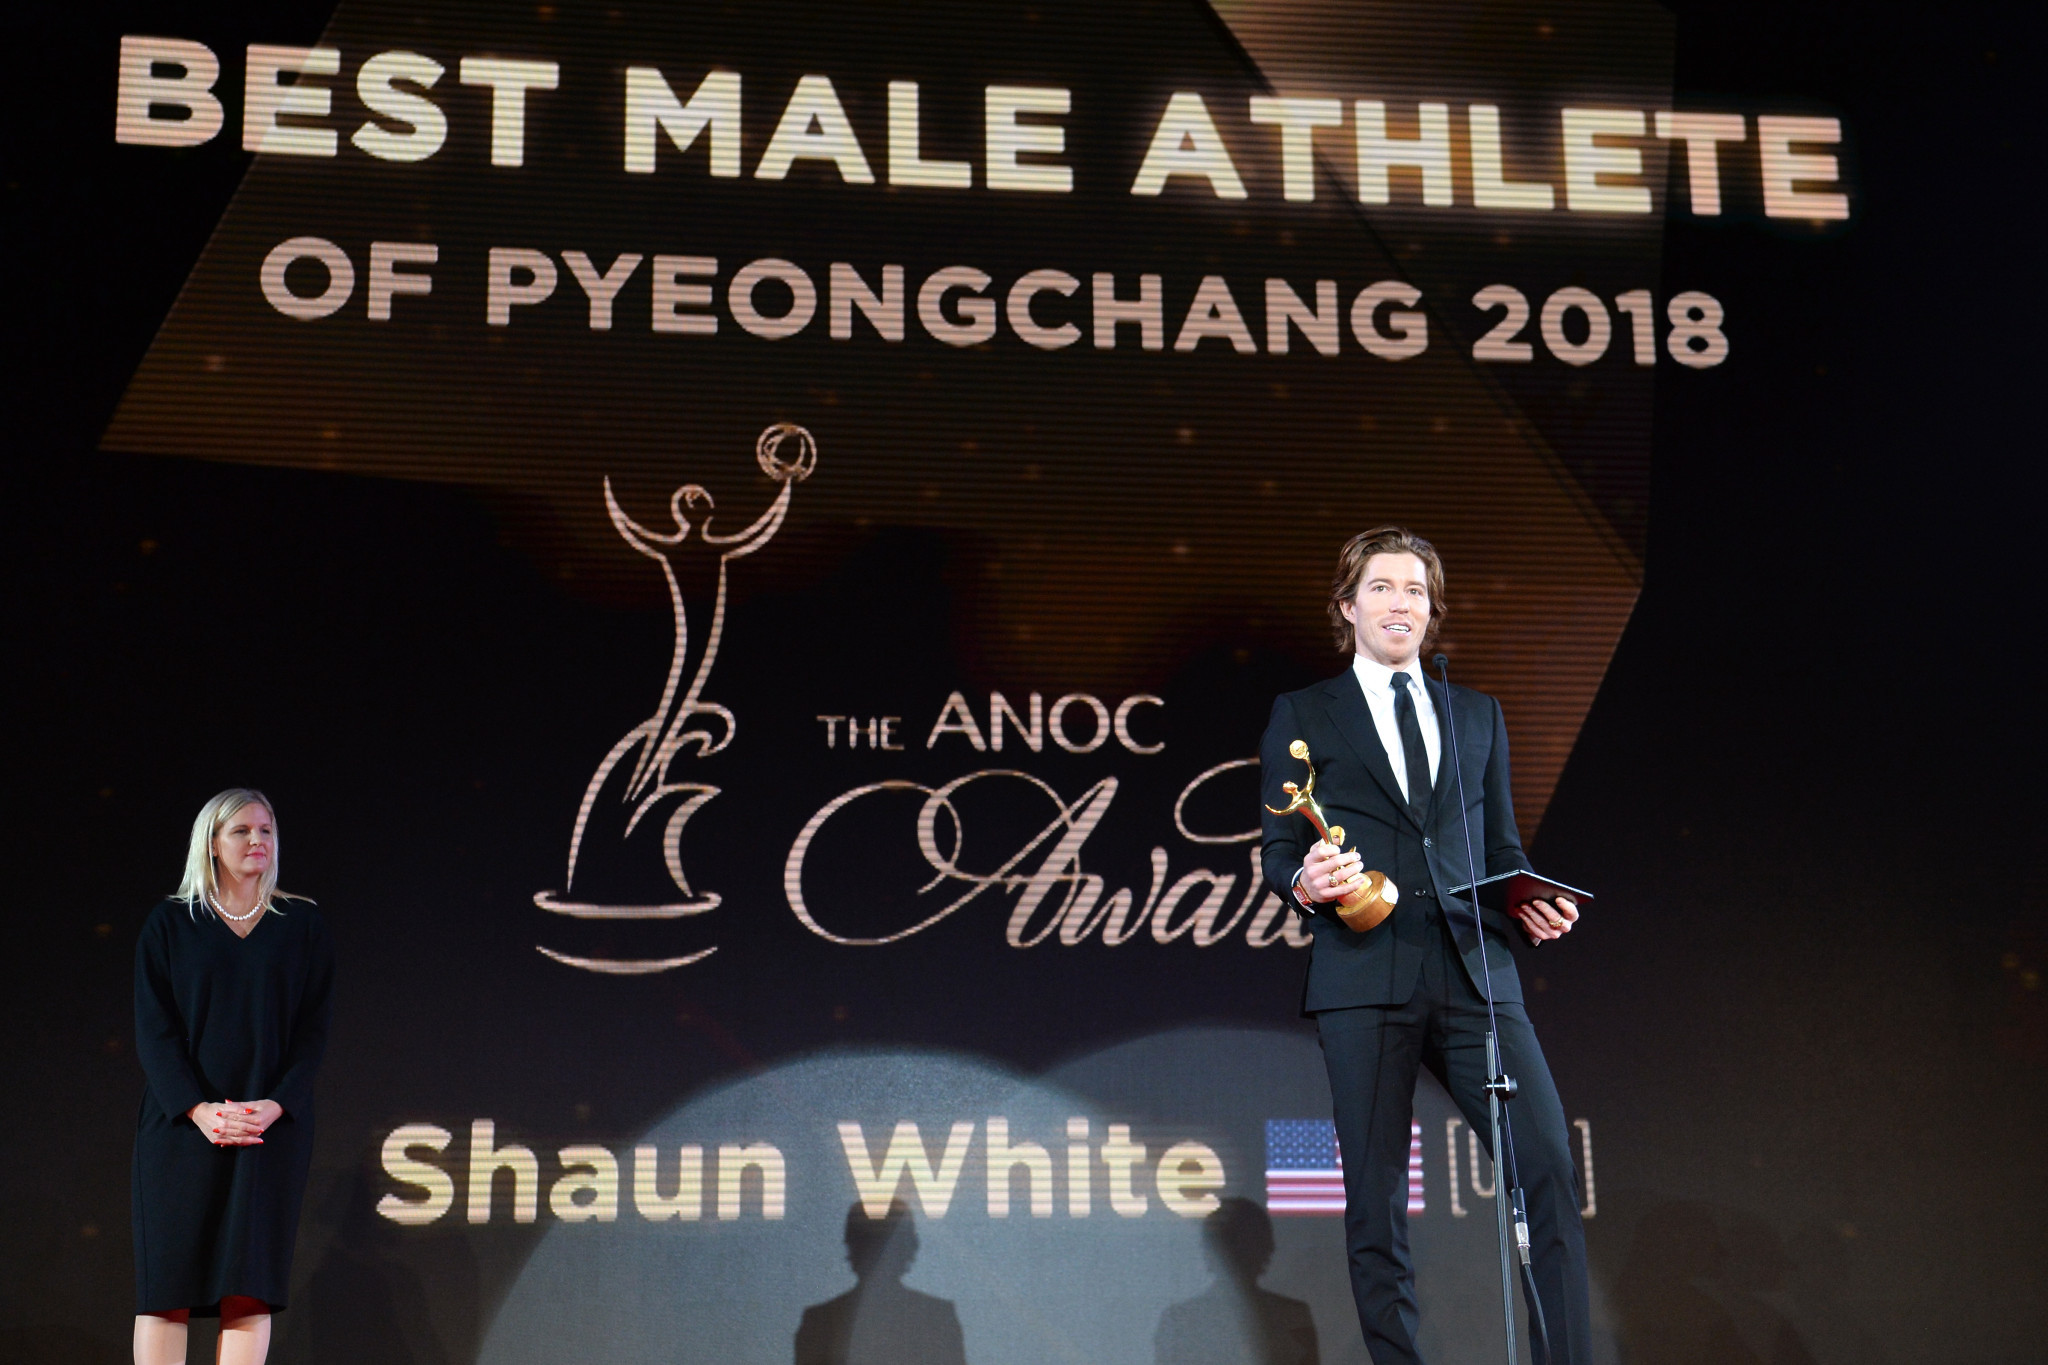 Shaun White was named best male athlete of Pyeongchang 2018 ©Getty Images